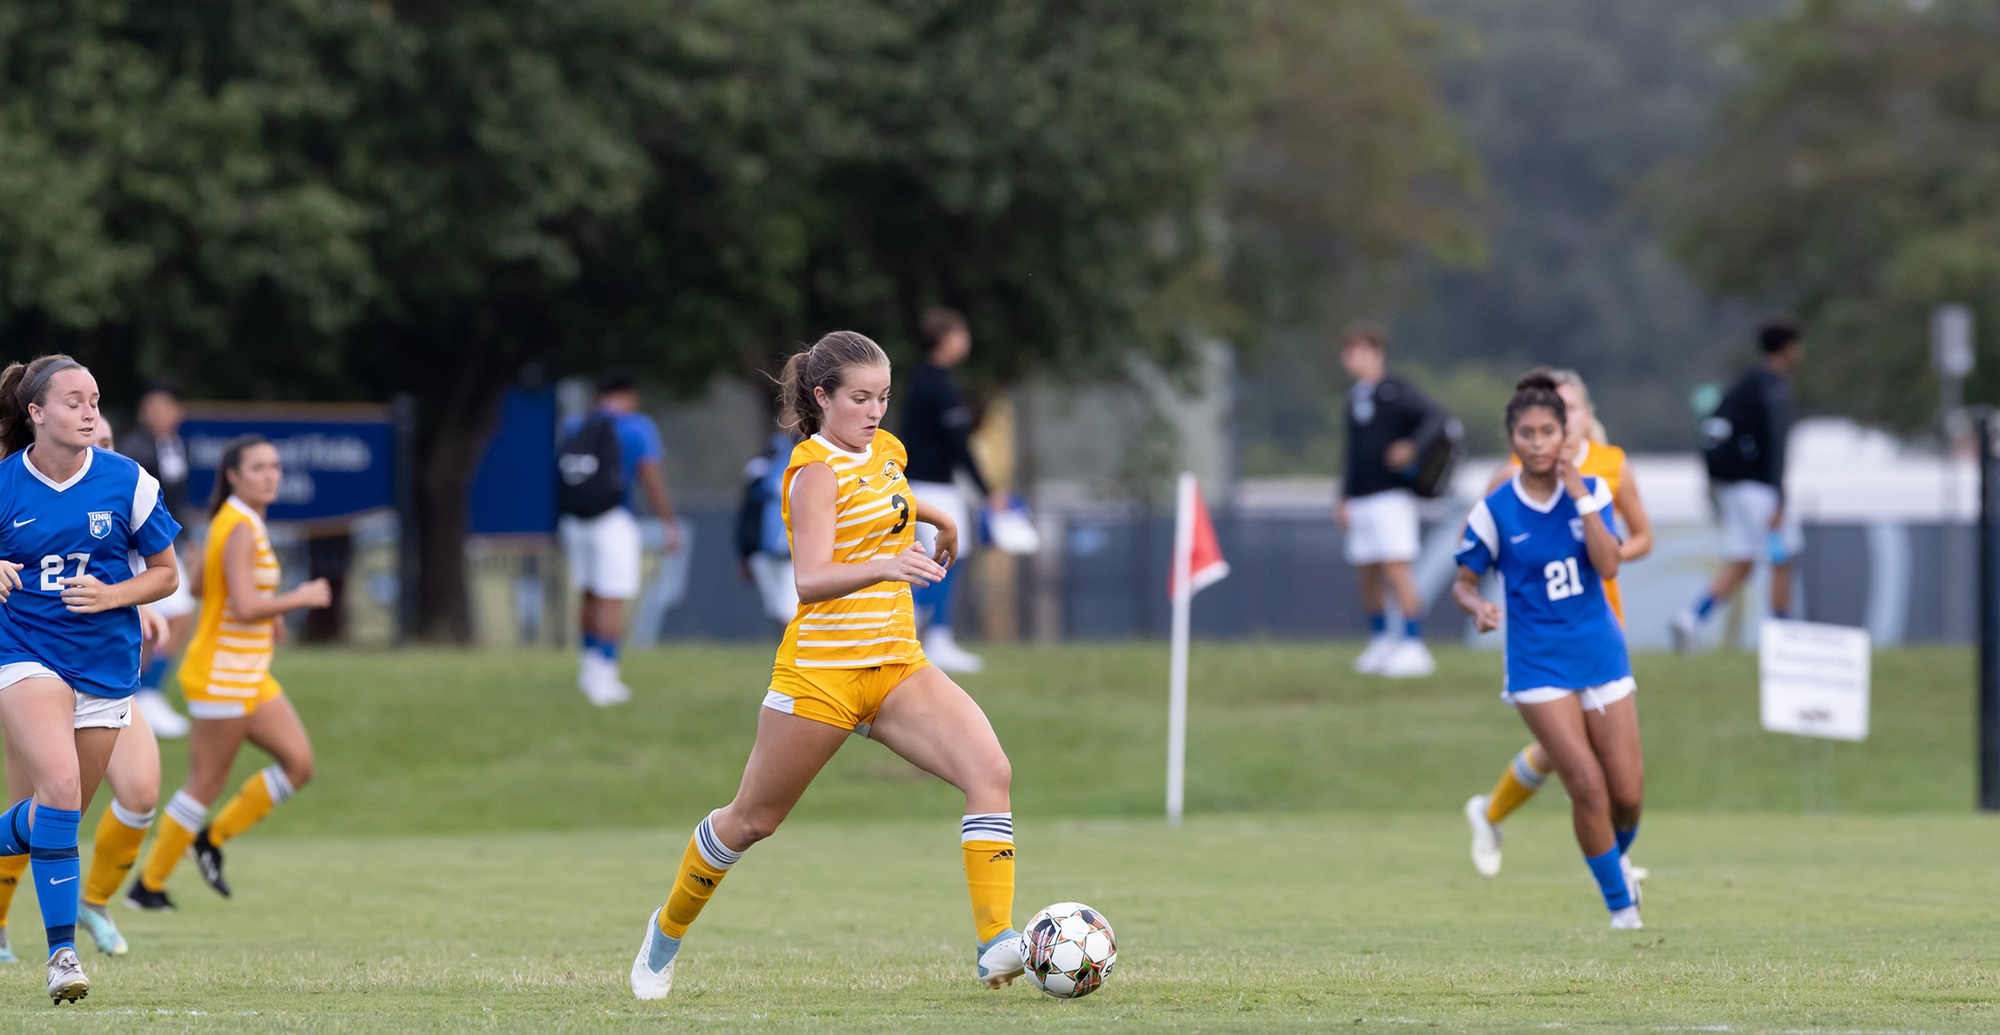 Unable To Tame The Cats; GSW Falls To Lander 1-0